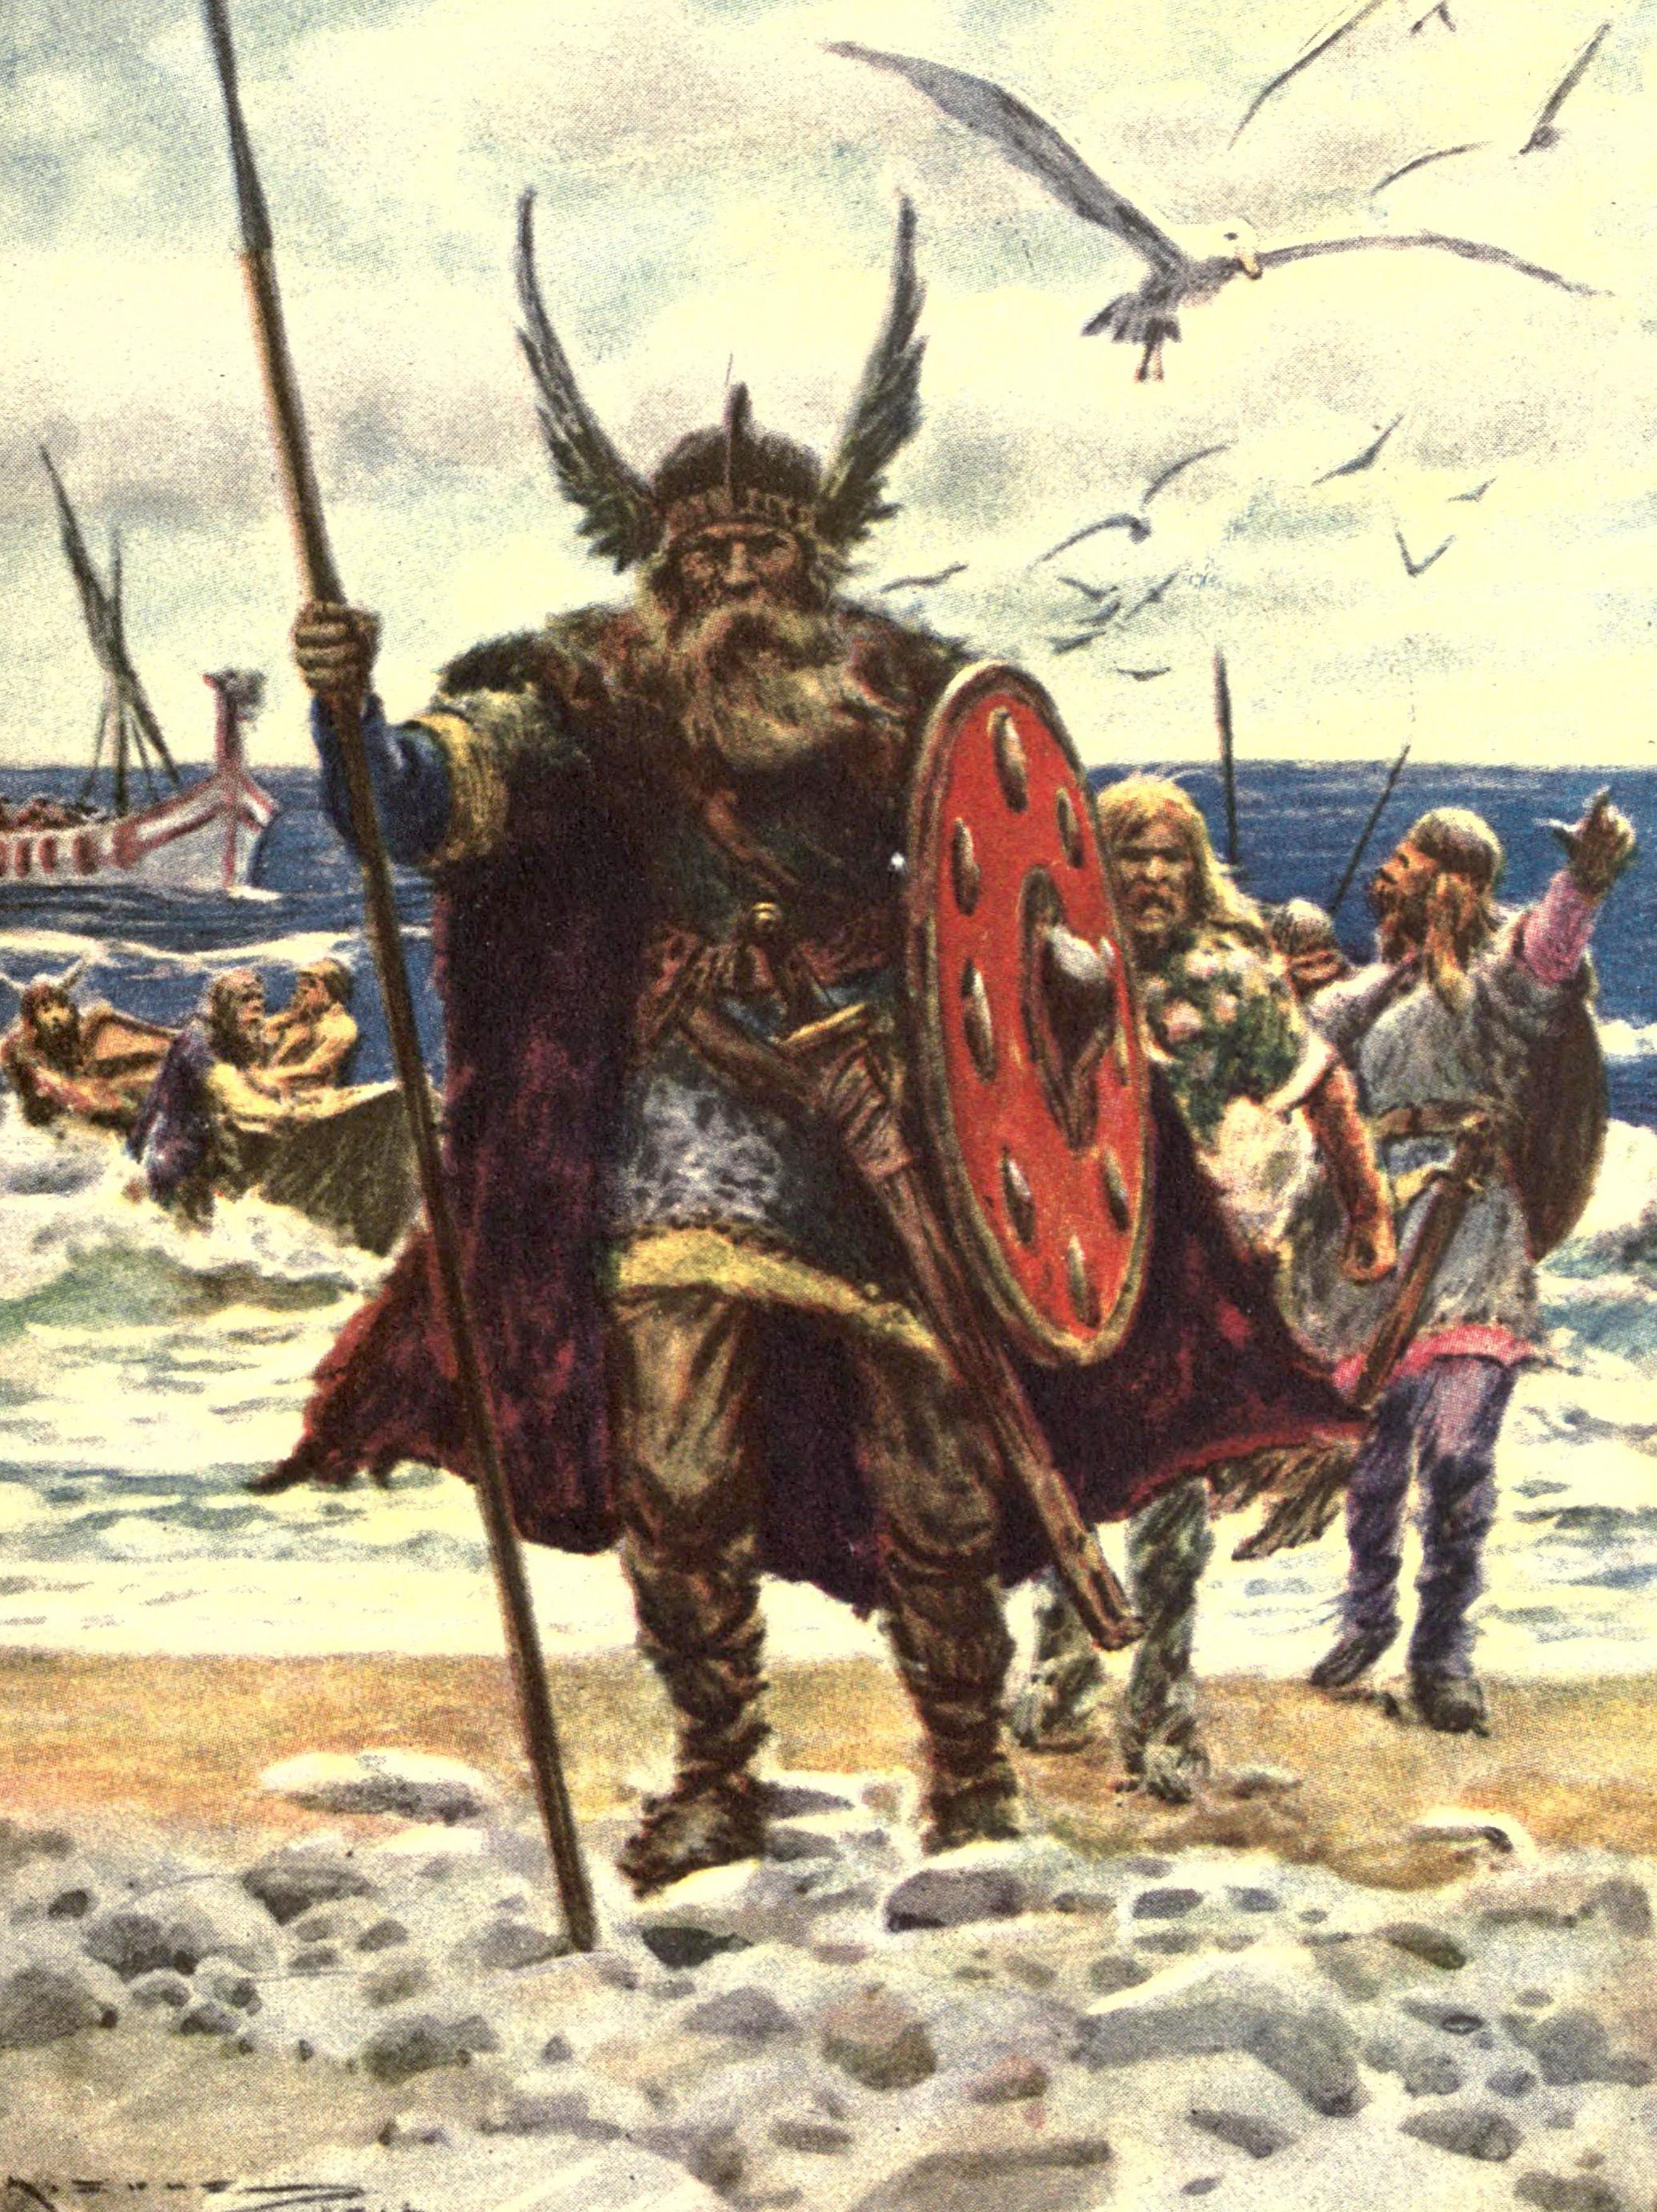 An artist’s impression of the famous Norse Viking explorer Lief Erikson, one of the first Europeans to reach Vinland (North America)